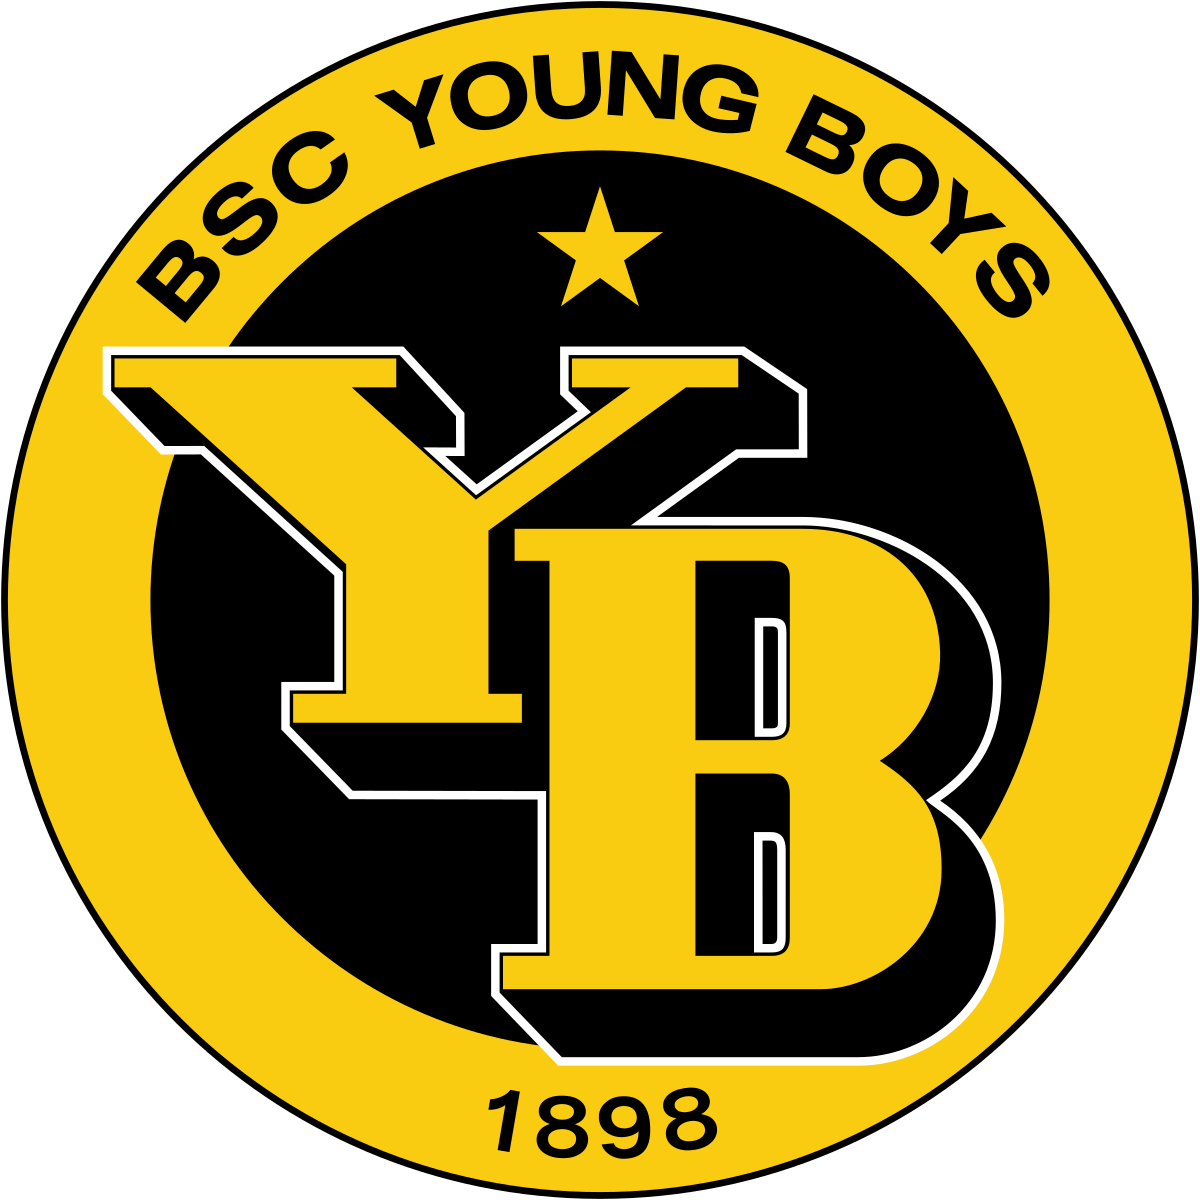 BSC Young Boys - Wikipedia